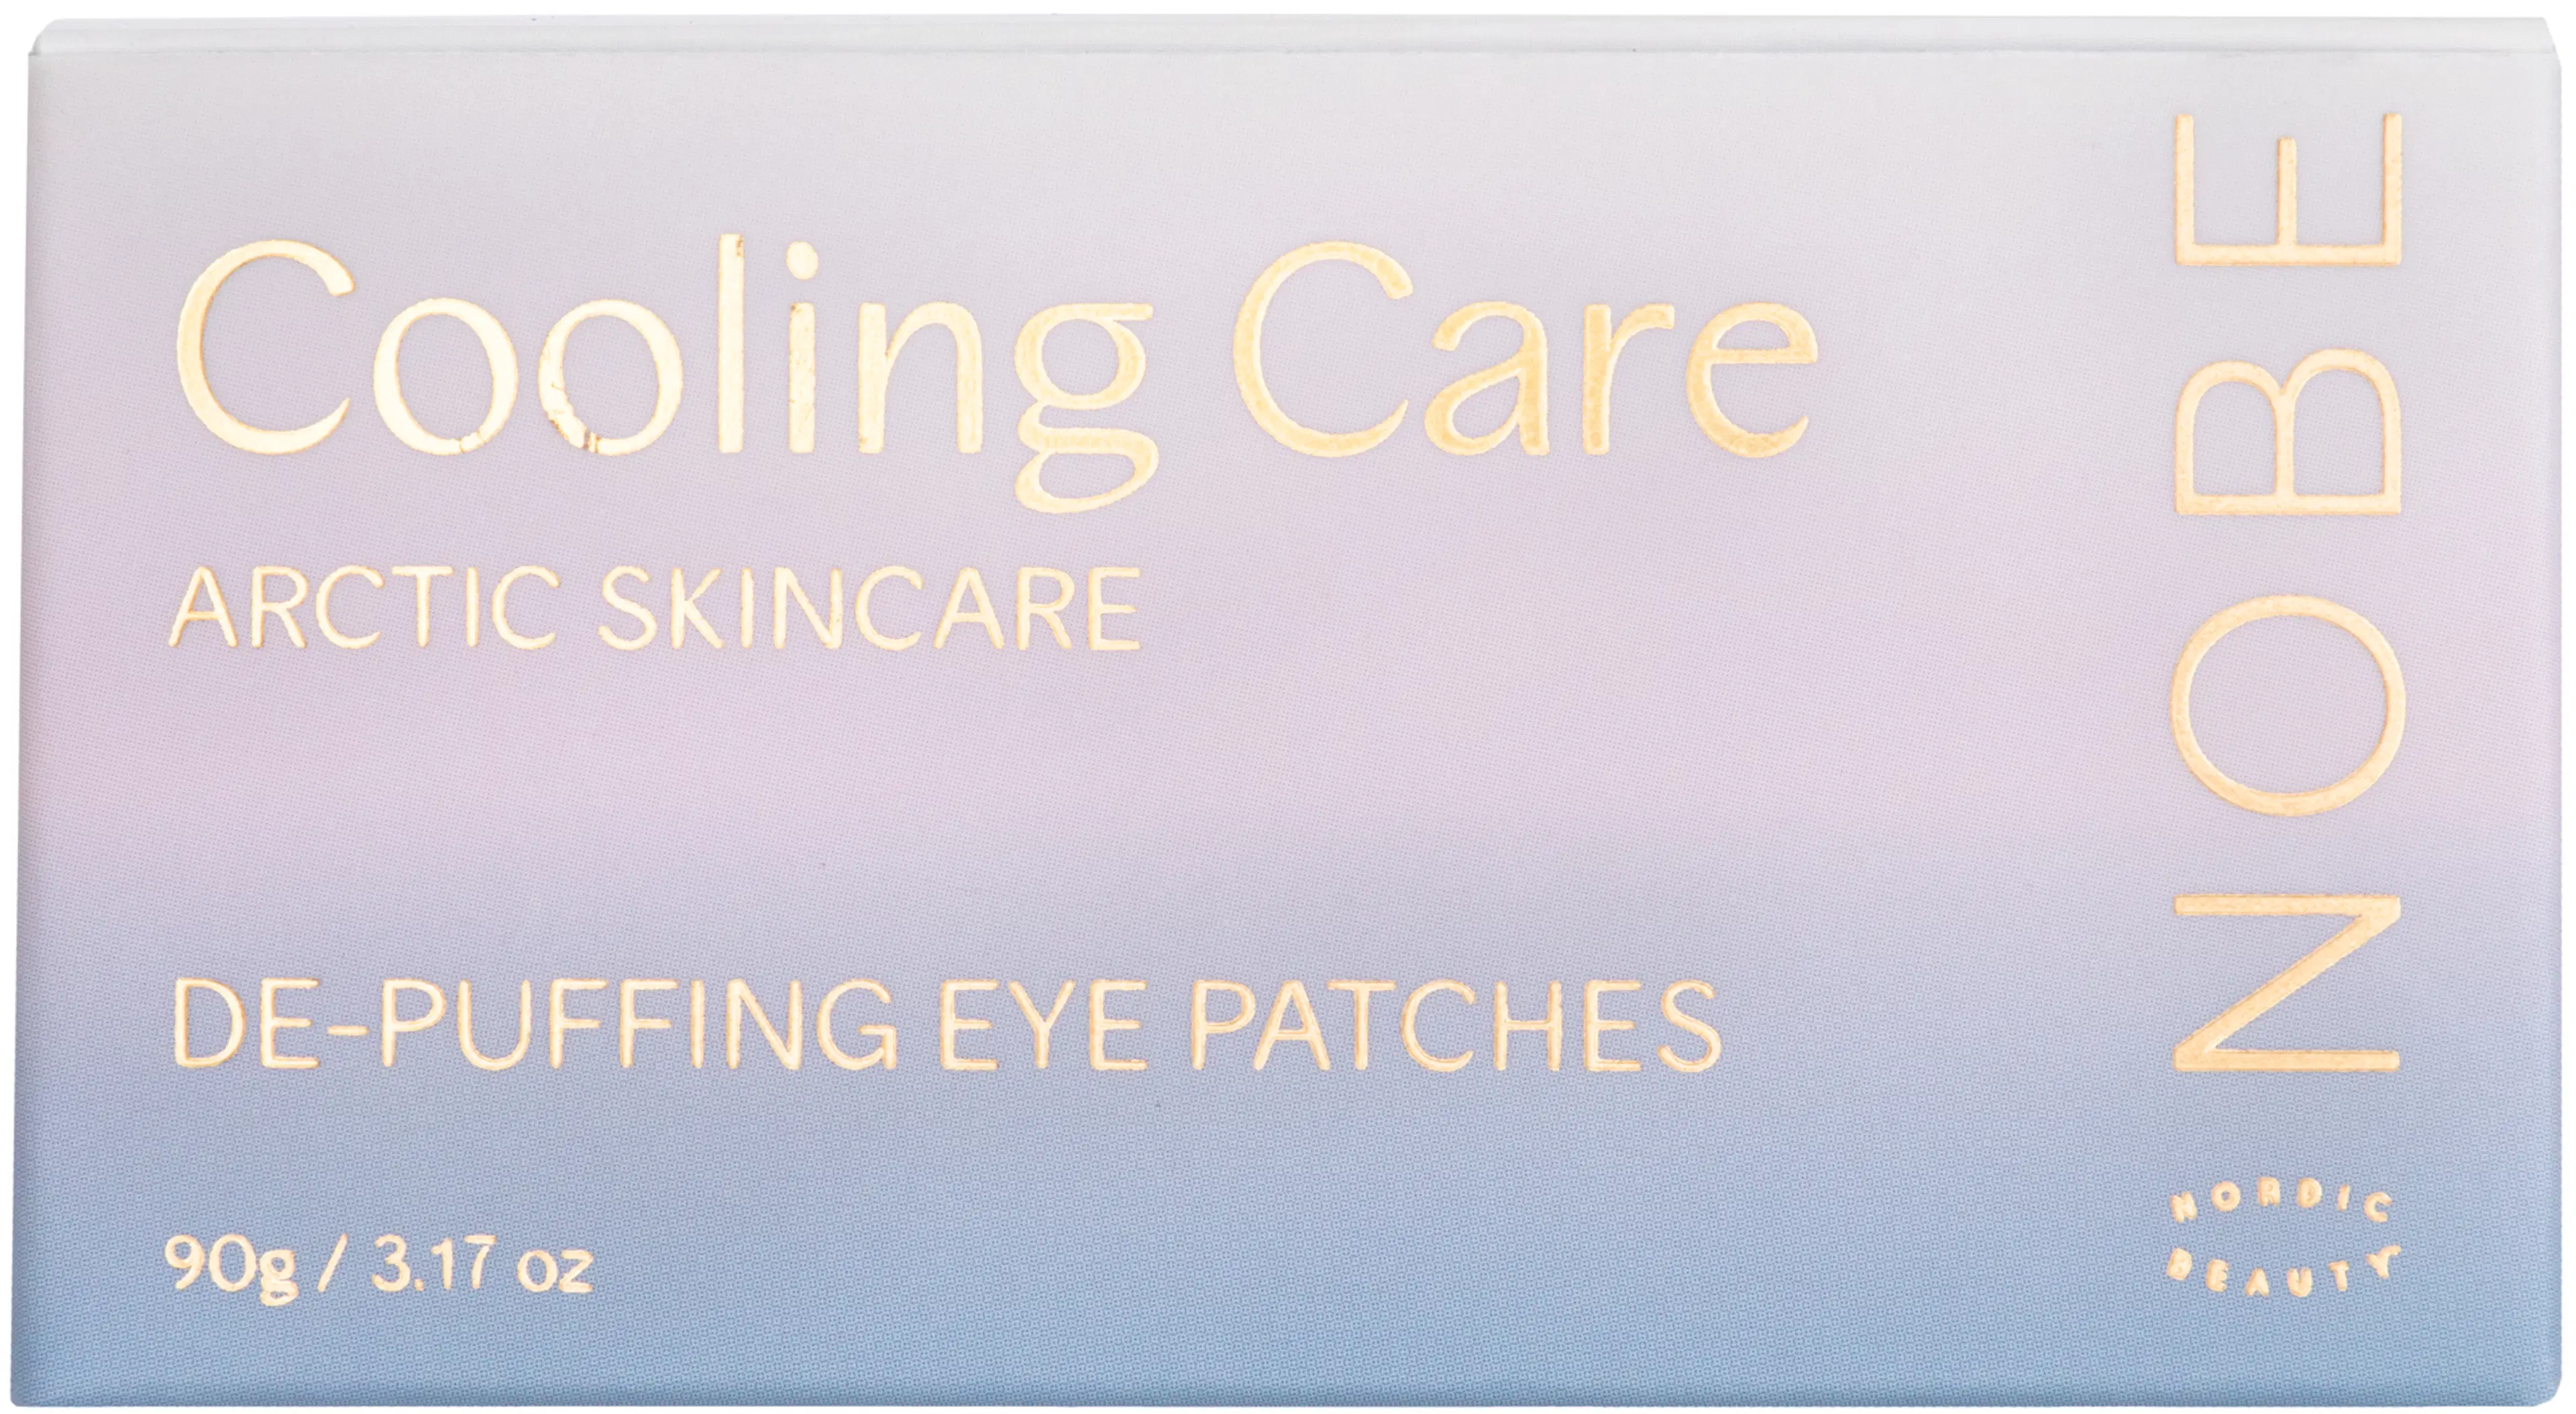 NOBE Nordic Beauty Cooling Care De-Puffing Eye Patches silmänympärysnaamiot 30 pairs